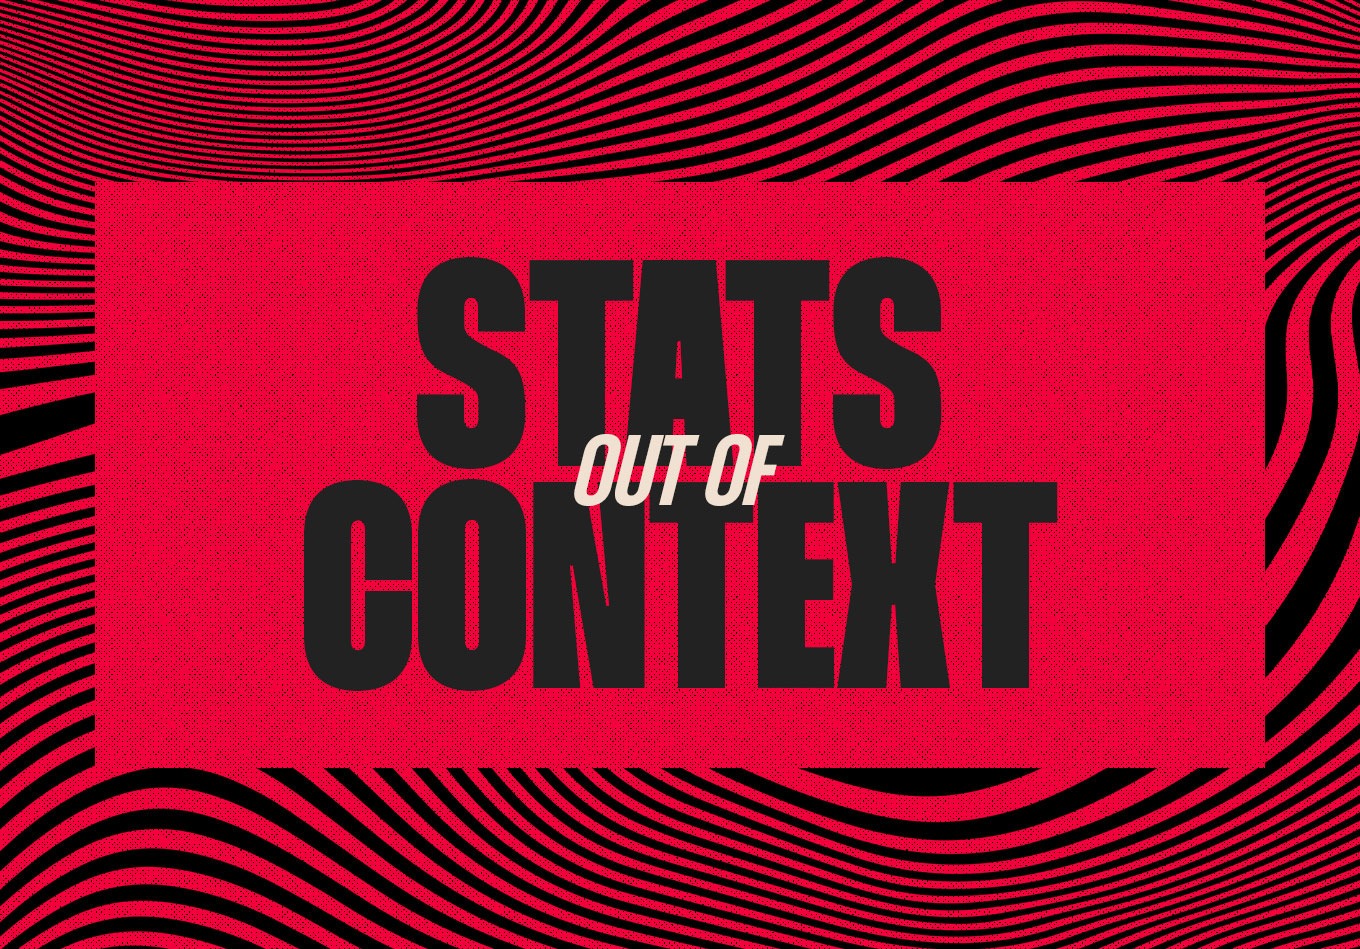 The Woodwork – Premier League Stats Out Of Context: Ep2